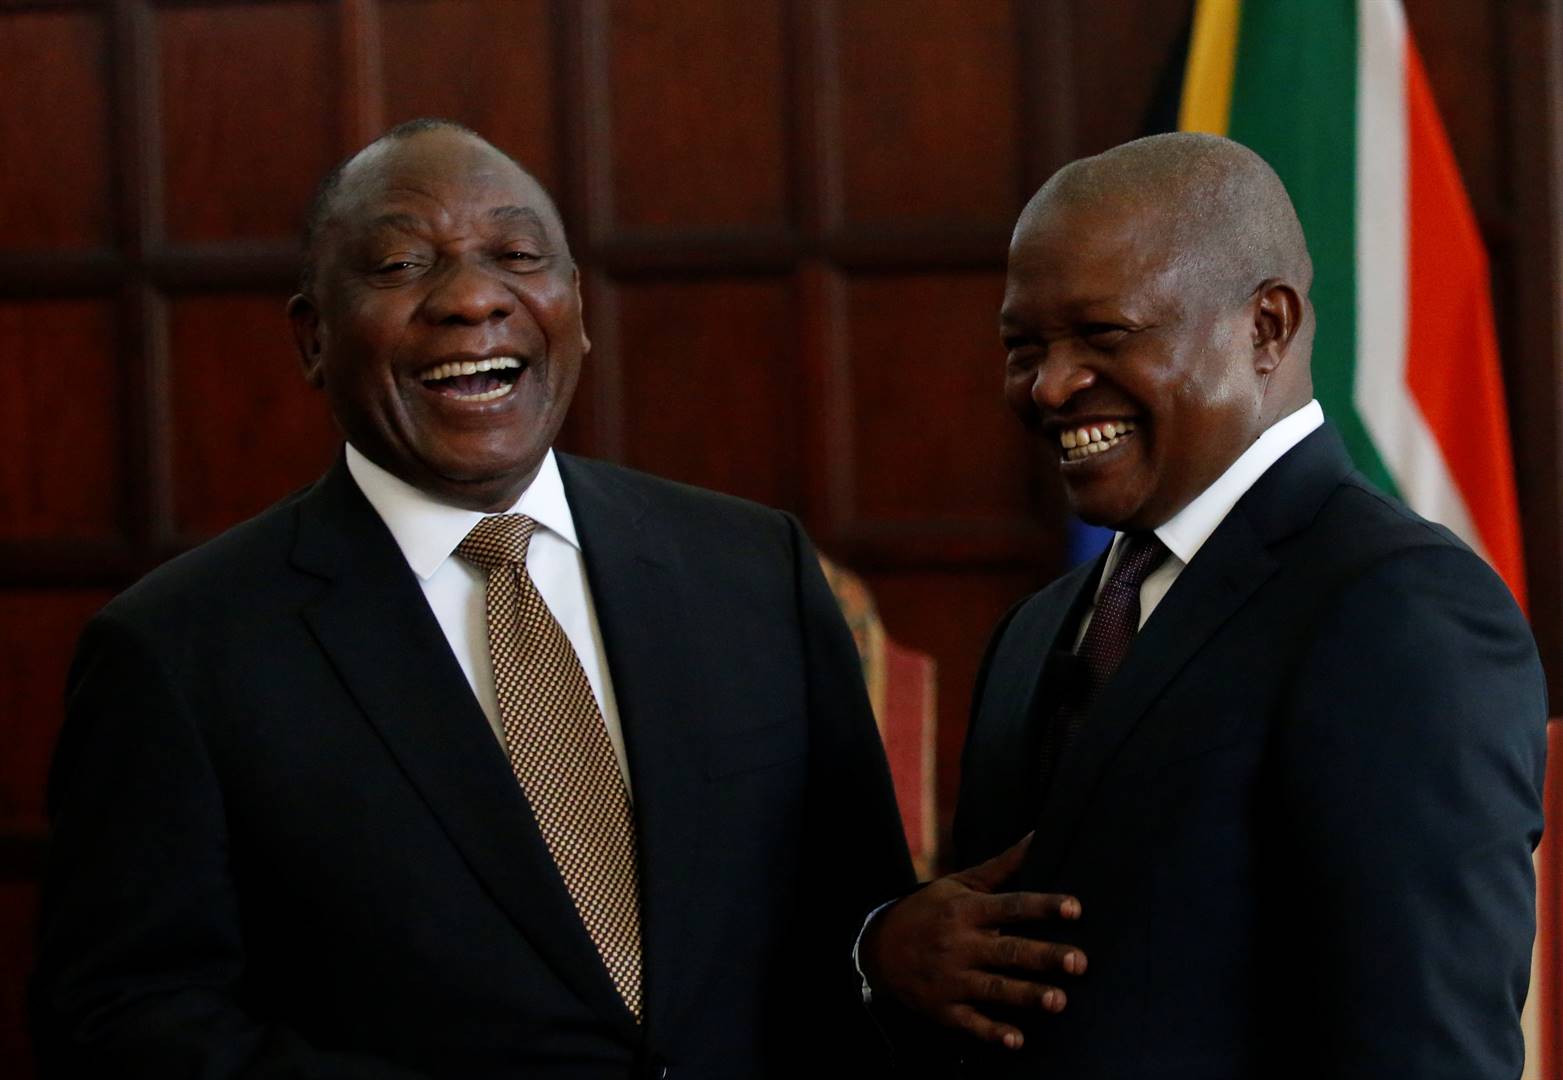  Cyril Ramaphosa laughs with Deputy President David Mabuza after he was sworn in as lawmaker in Pretoria on Tuesday (May 28 2019). Picture: Siphiwe Sibeko/Reuters